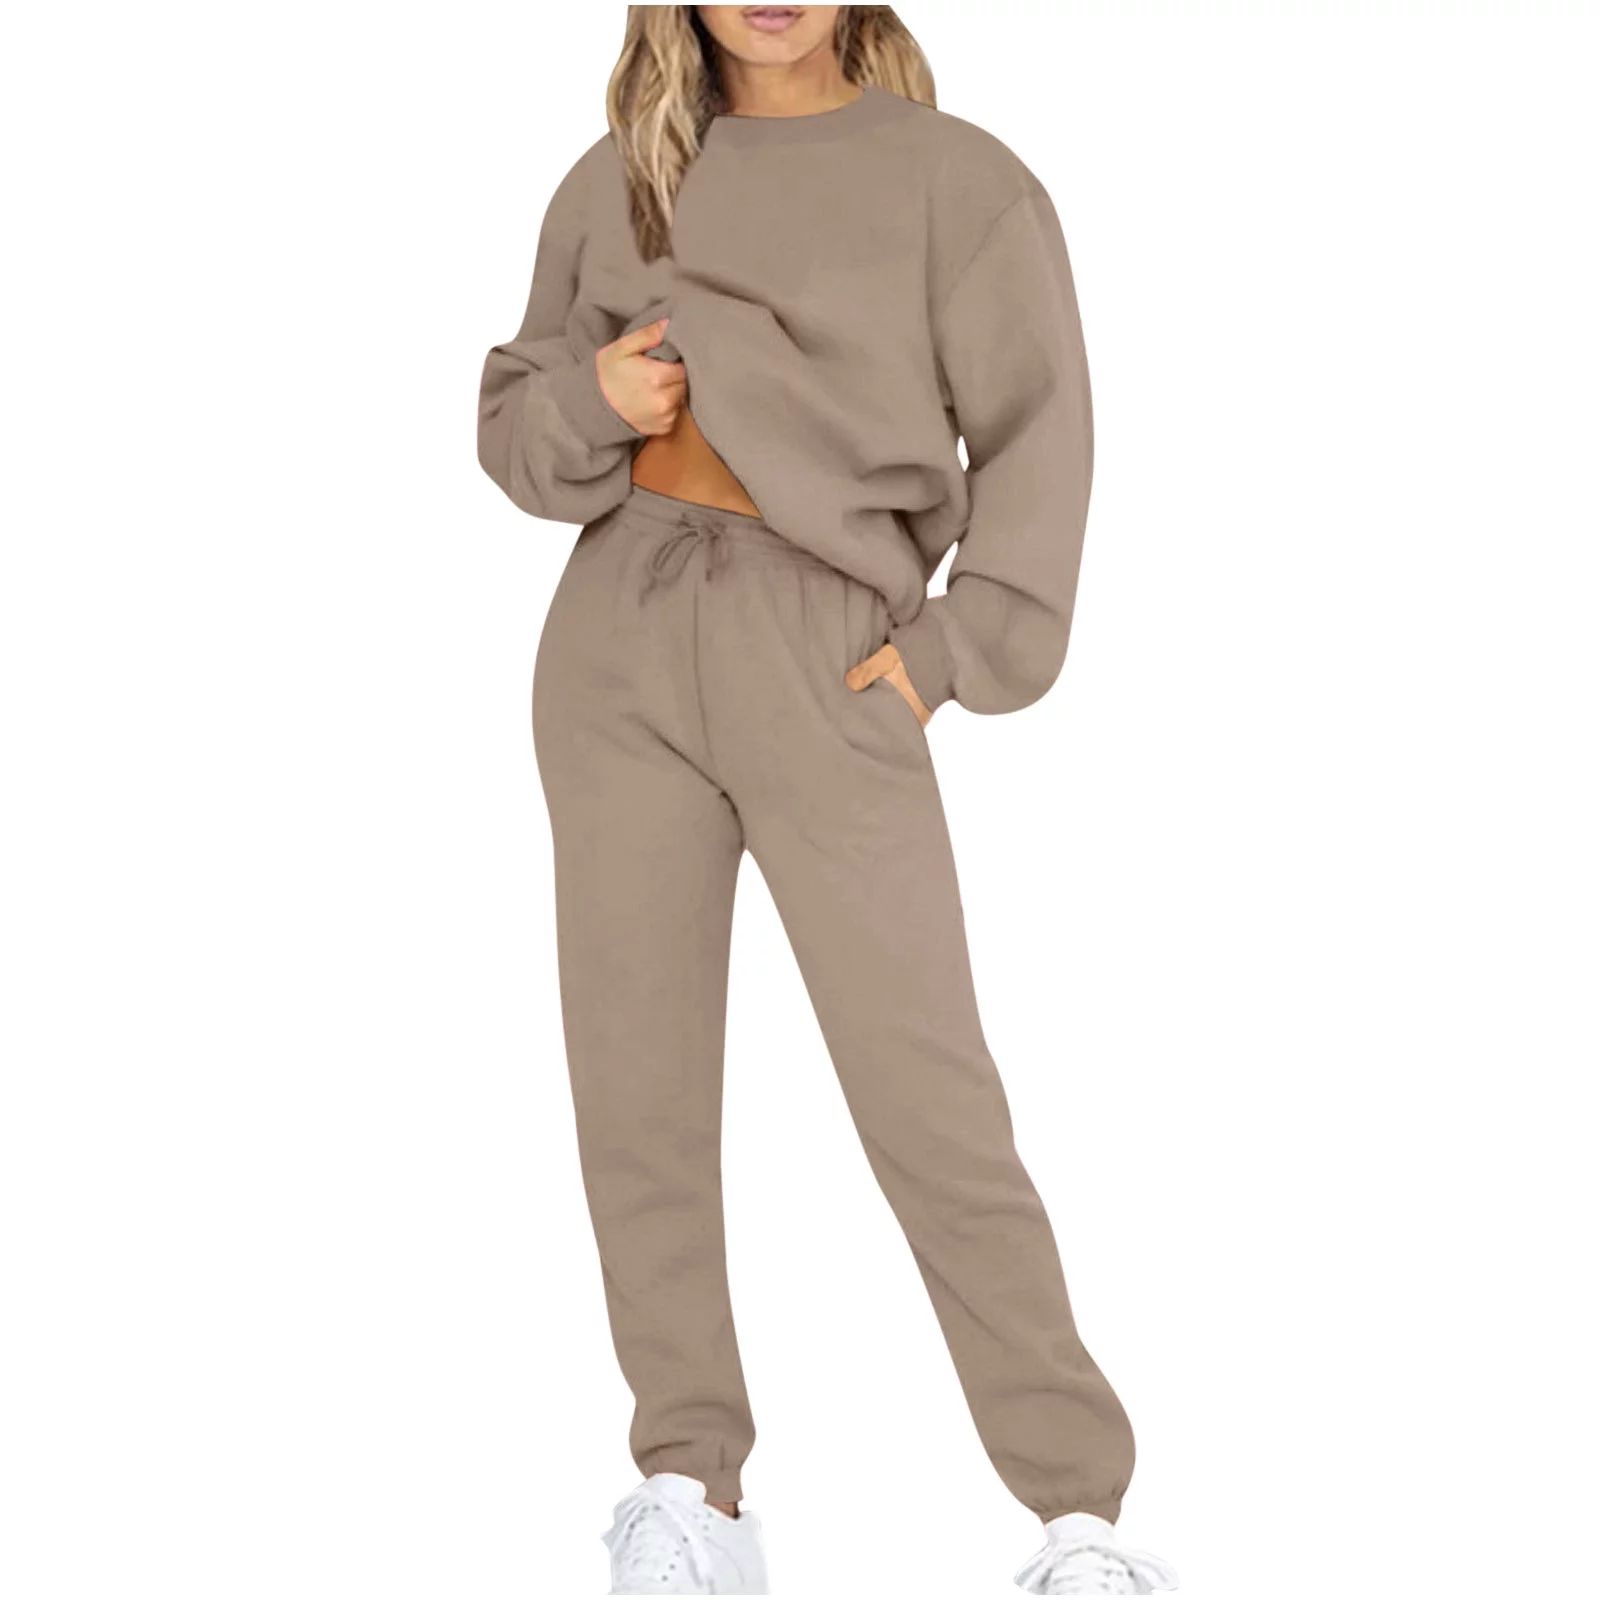 2 Piece Outfits Lounge Sets for Women Casual Long Sleeve Crewneck Sweatshirt and Sweatpants Track... | Walmart (US)